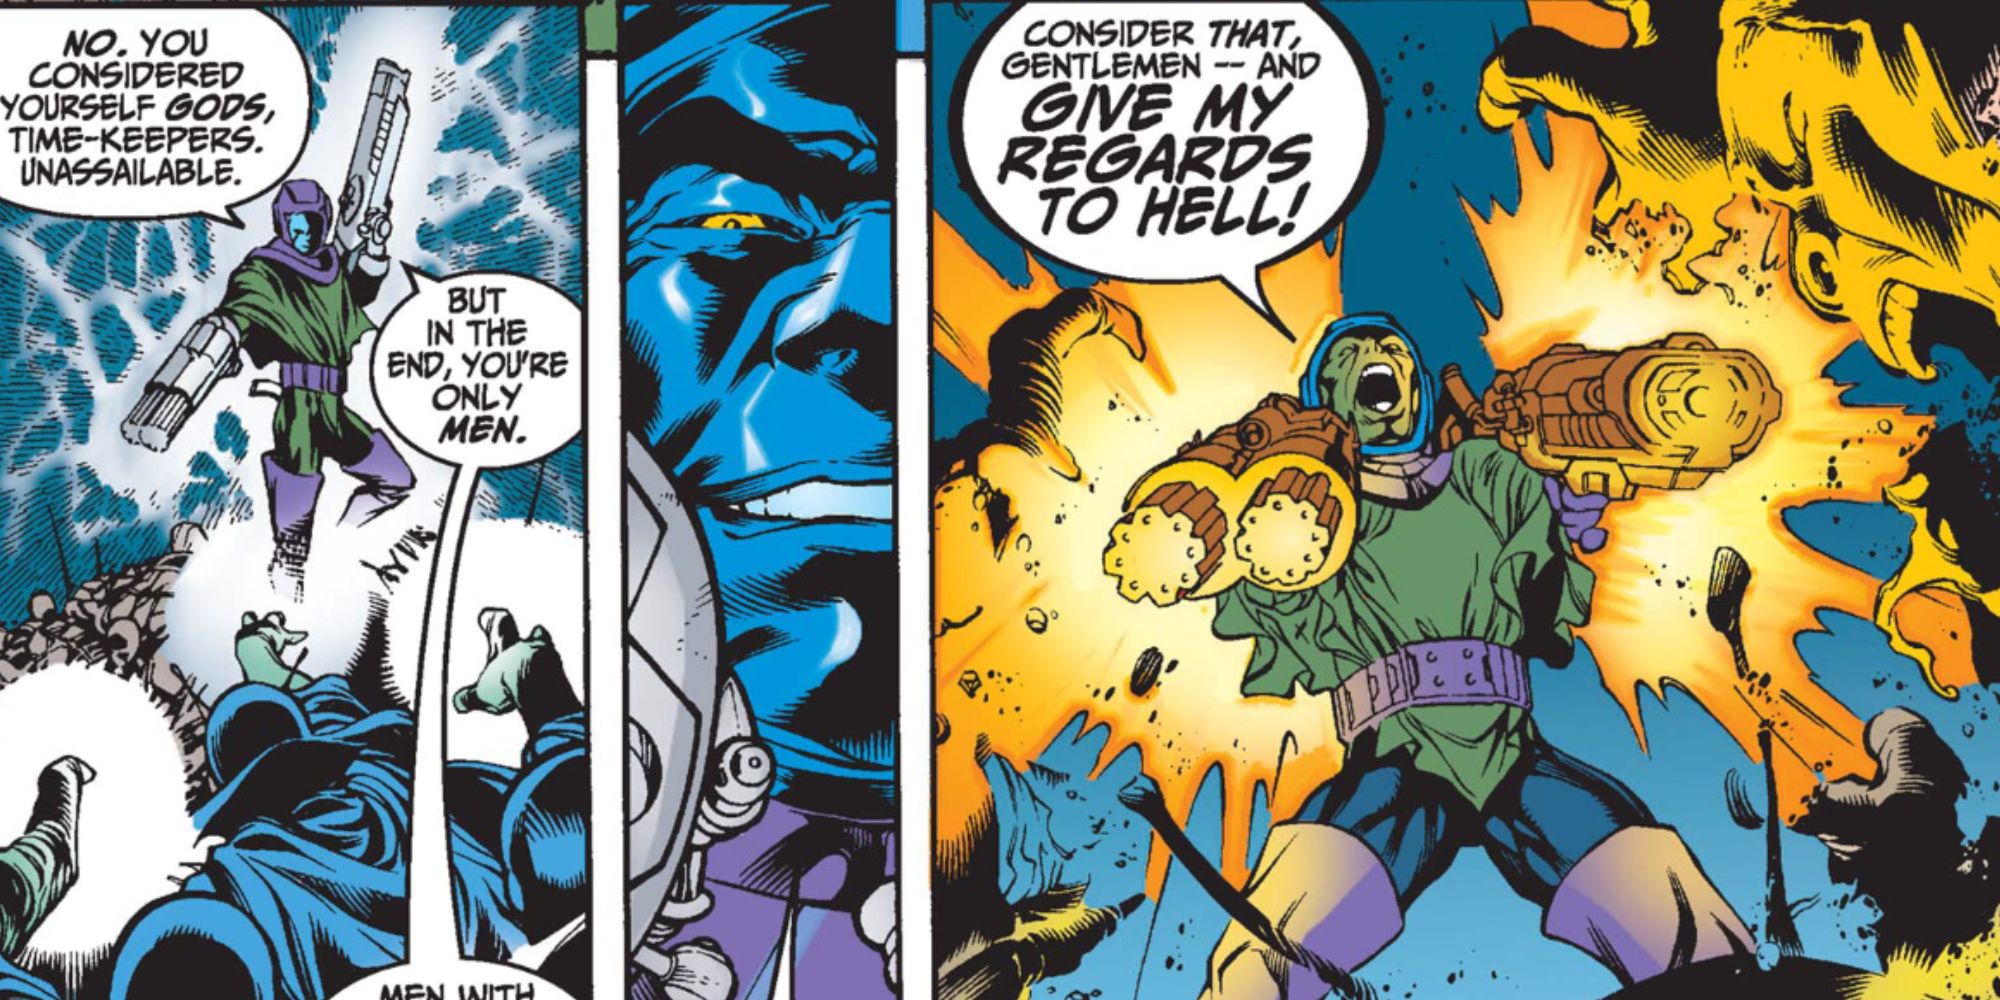 Kang The Conqueror fights the time Keepers in Marvel Comics.